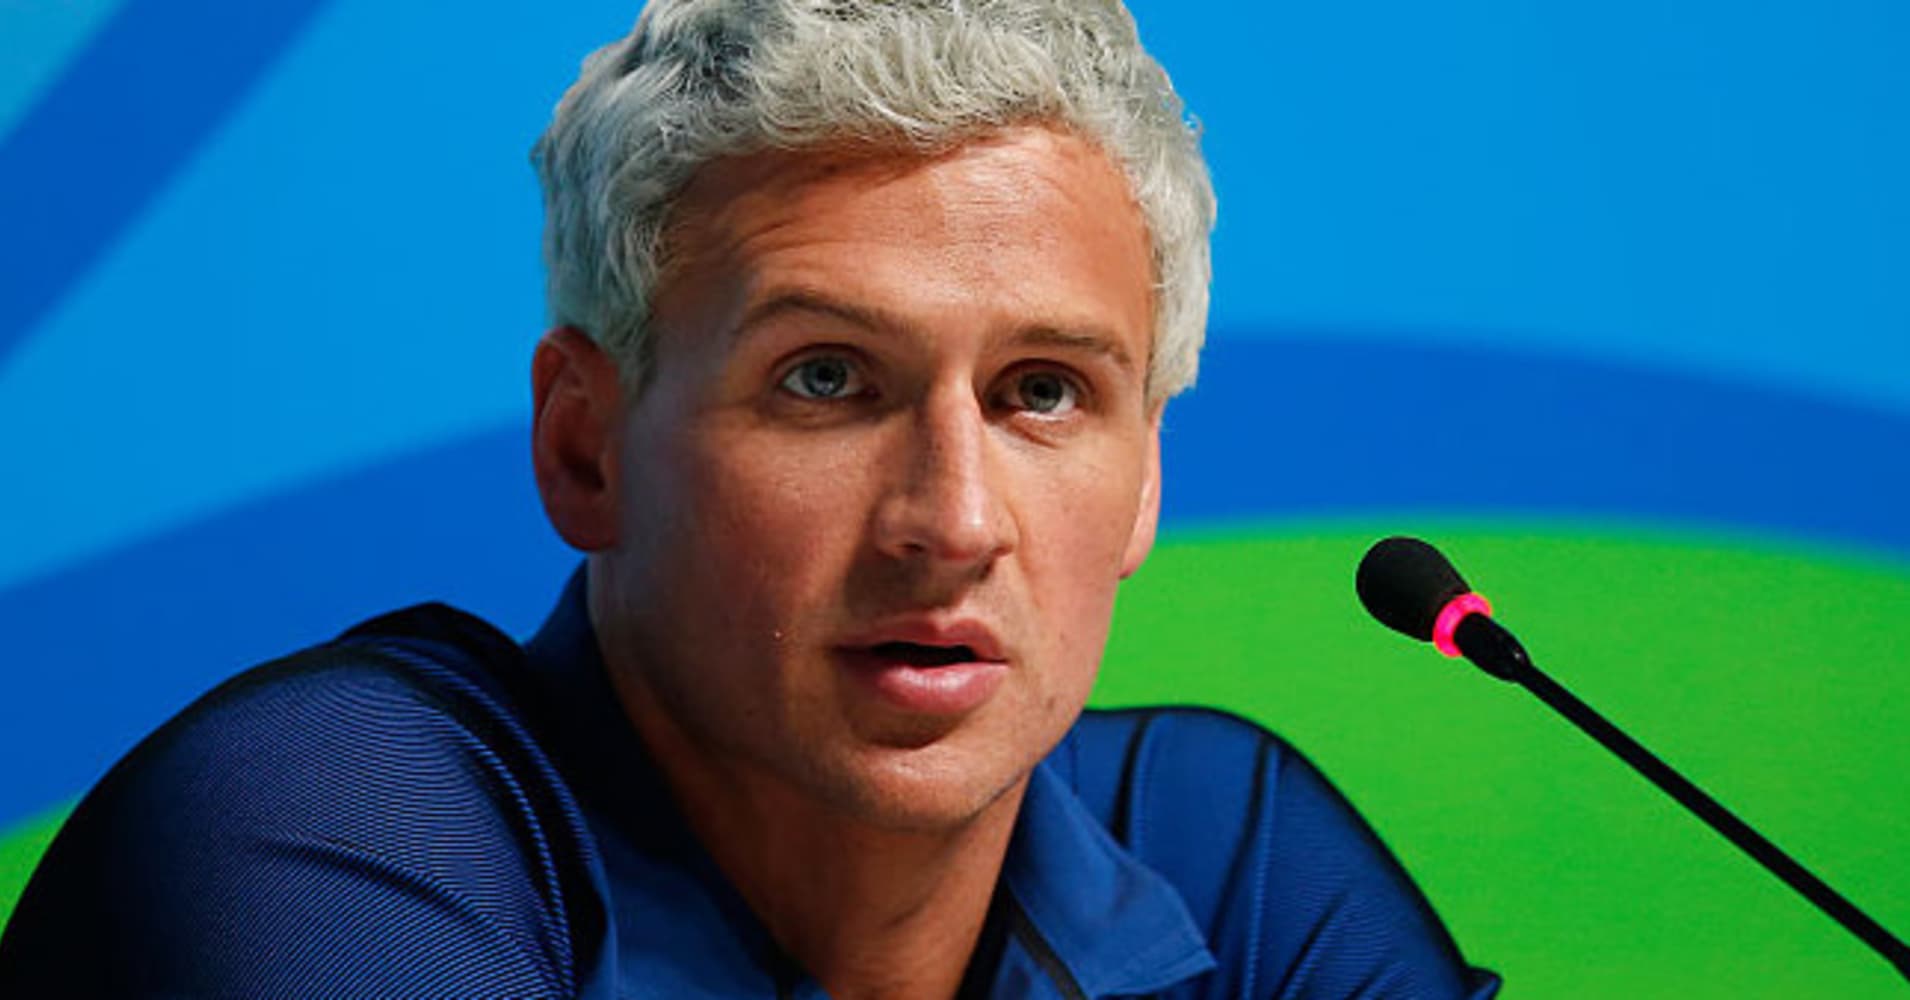 Would Ryan Lochte face jail time if it turns out he’s lying? Probably not—commentary